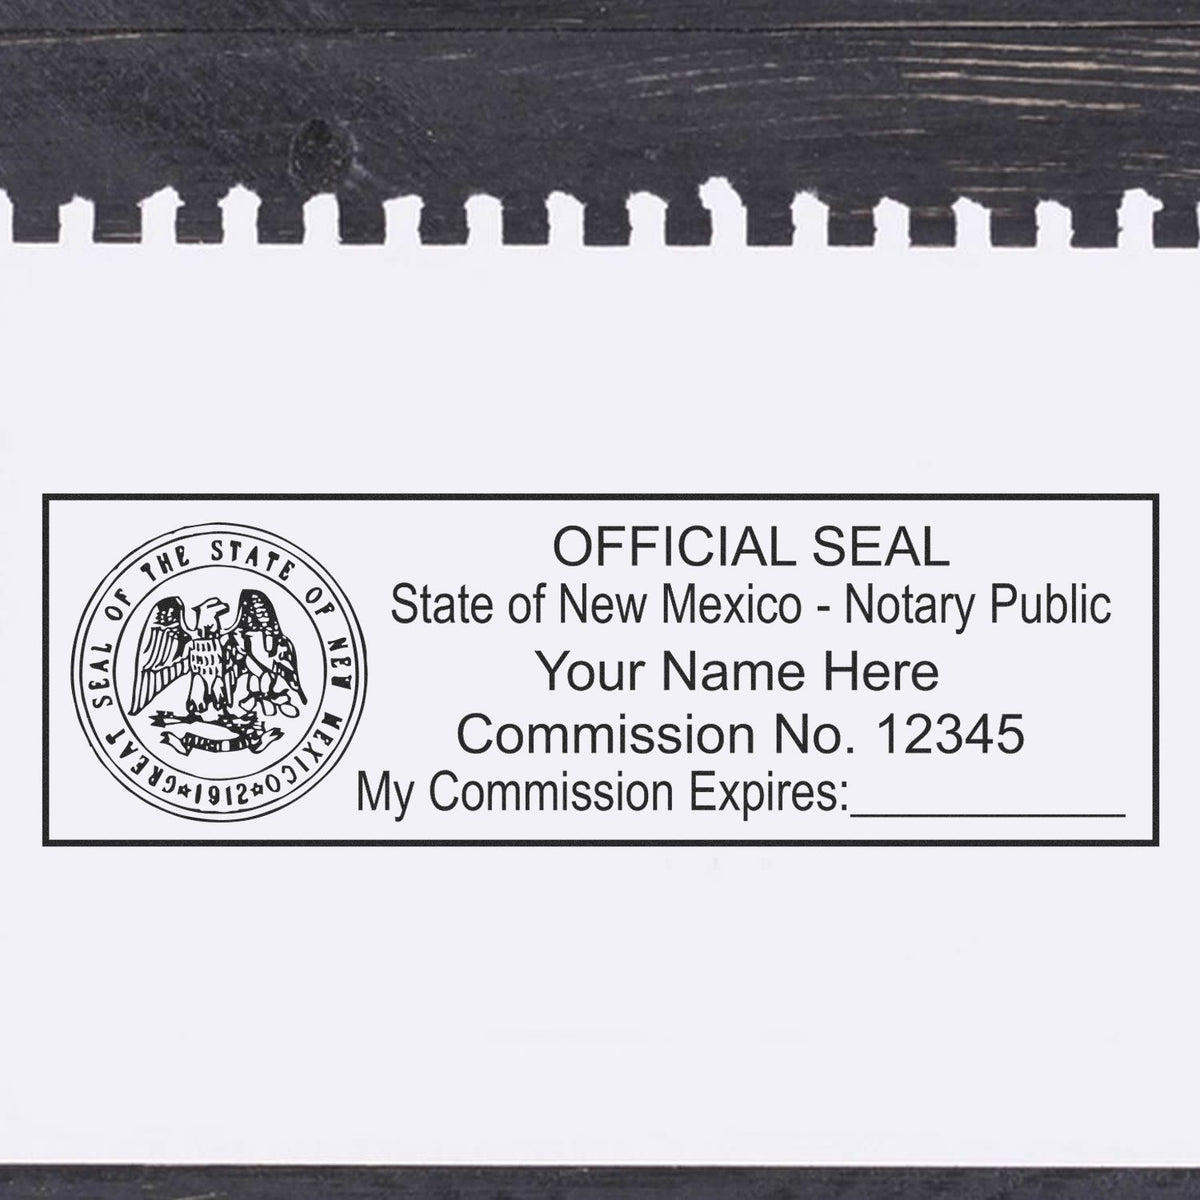 This paper is stamped with a sample imprint of the Super Slim New Mexico Notary Public Stamp, signifying its quality and reliability.